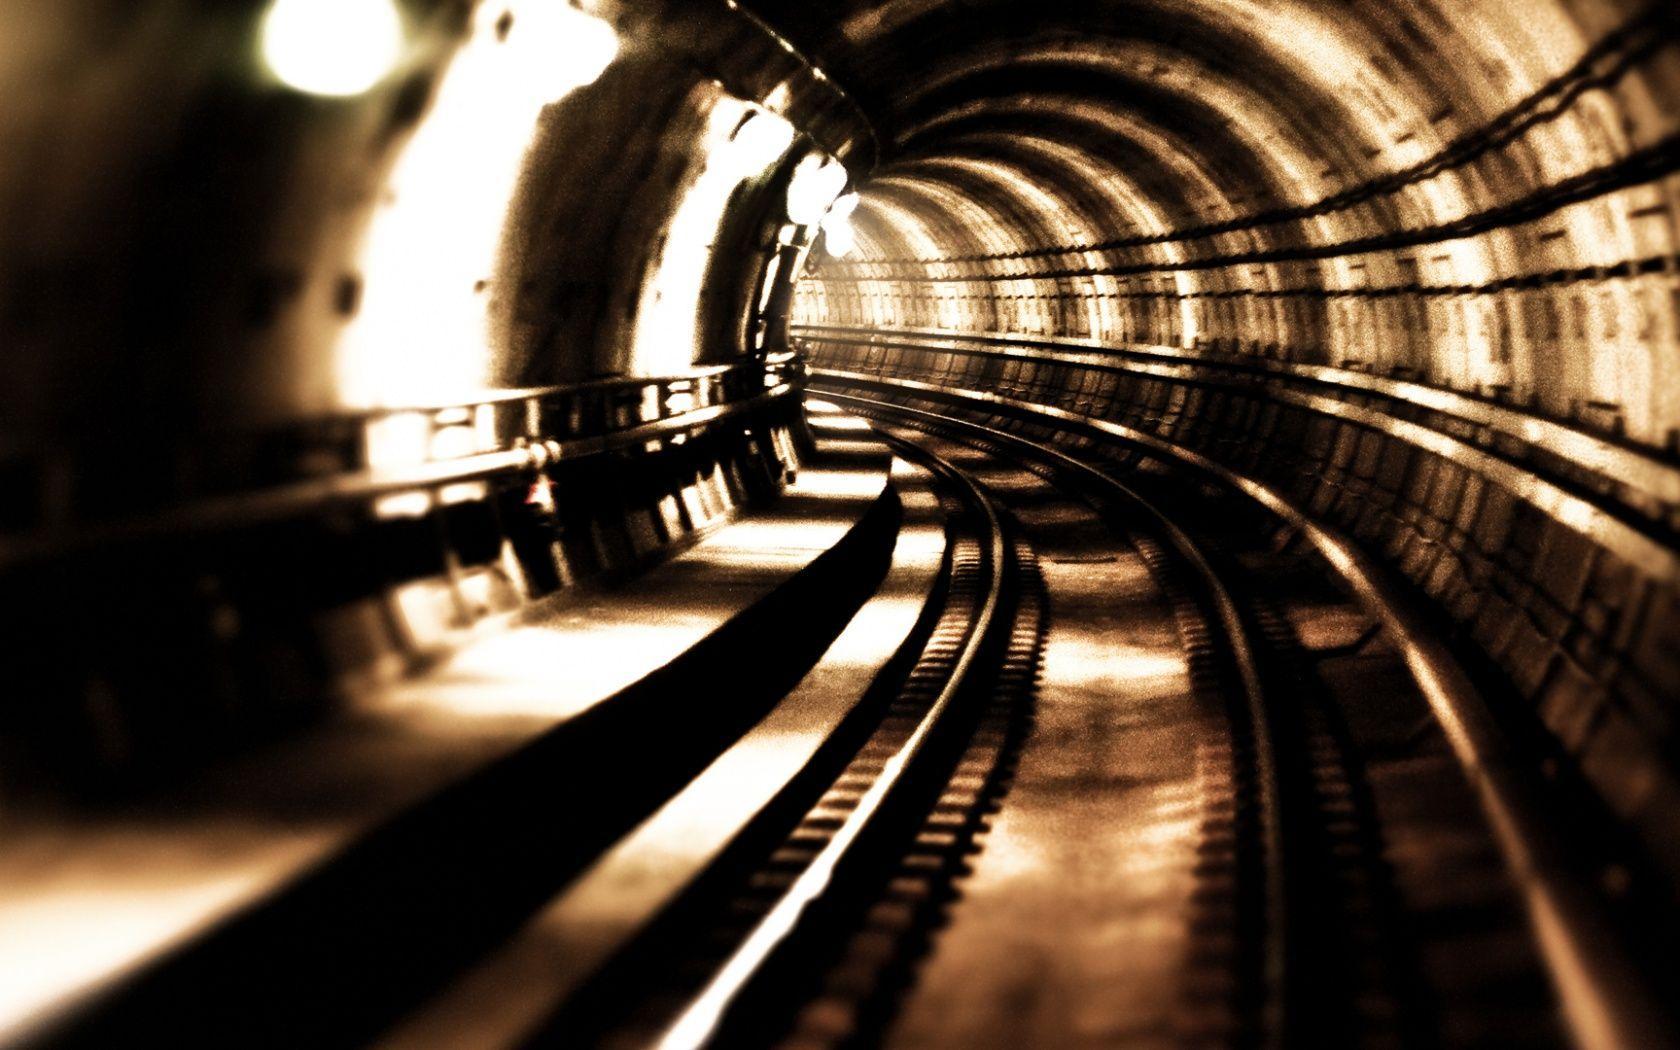 Metro Subway Tunnel wallpaper and image, picture